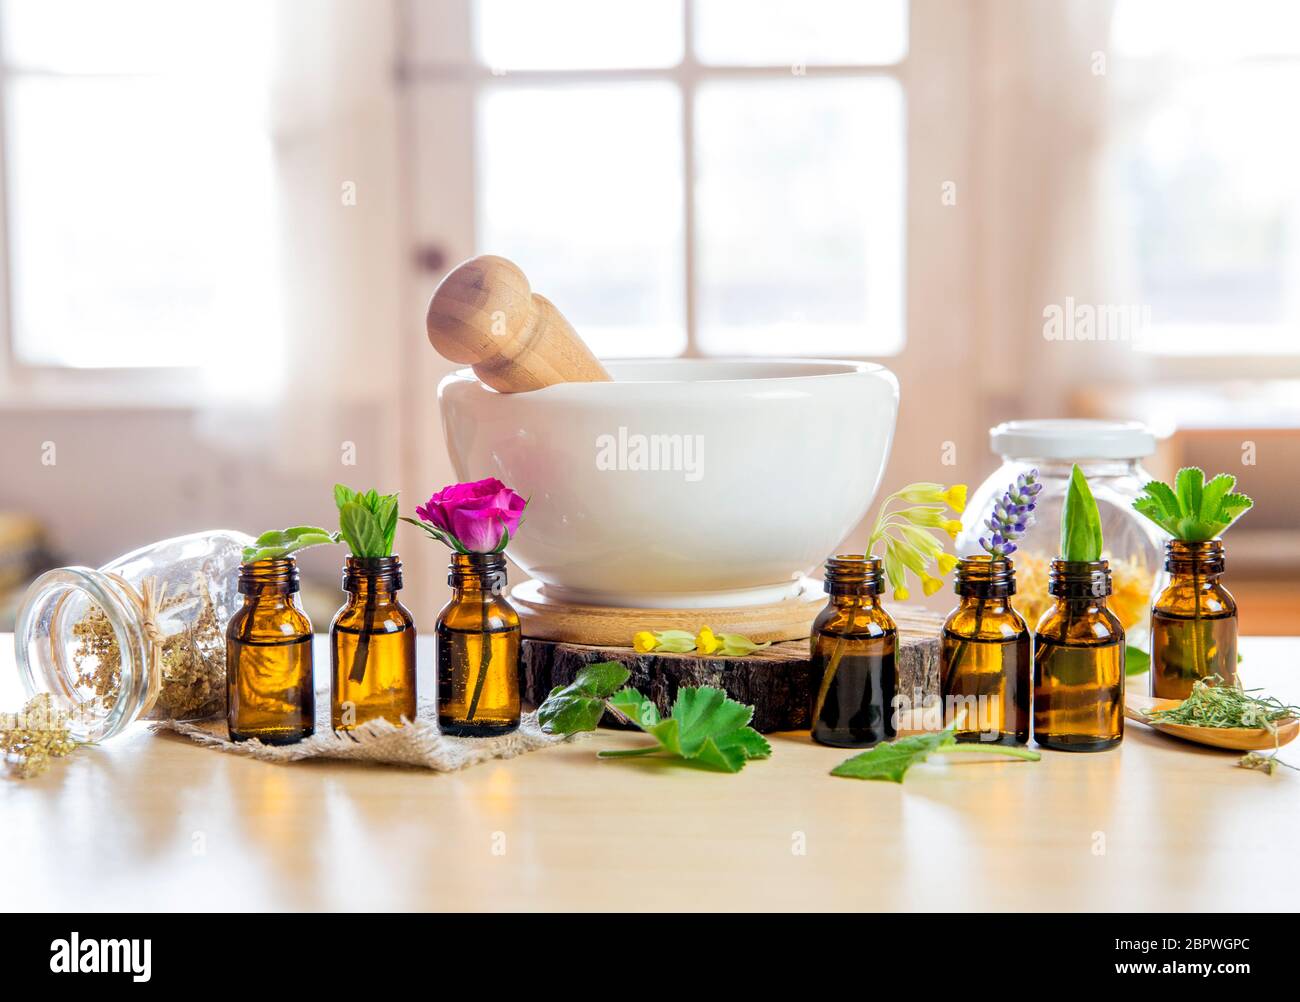 Herbal remedy composition concept. Essential oil bottles with mortar and pestle and leaves. Blurred white window with glowing daylight background. Stock Photo